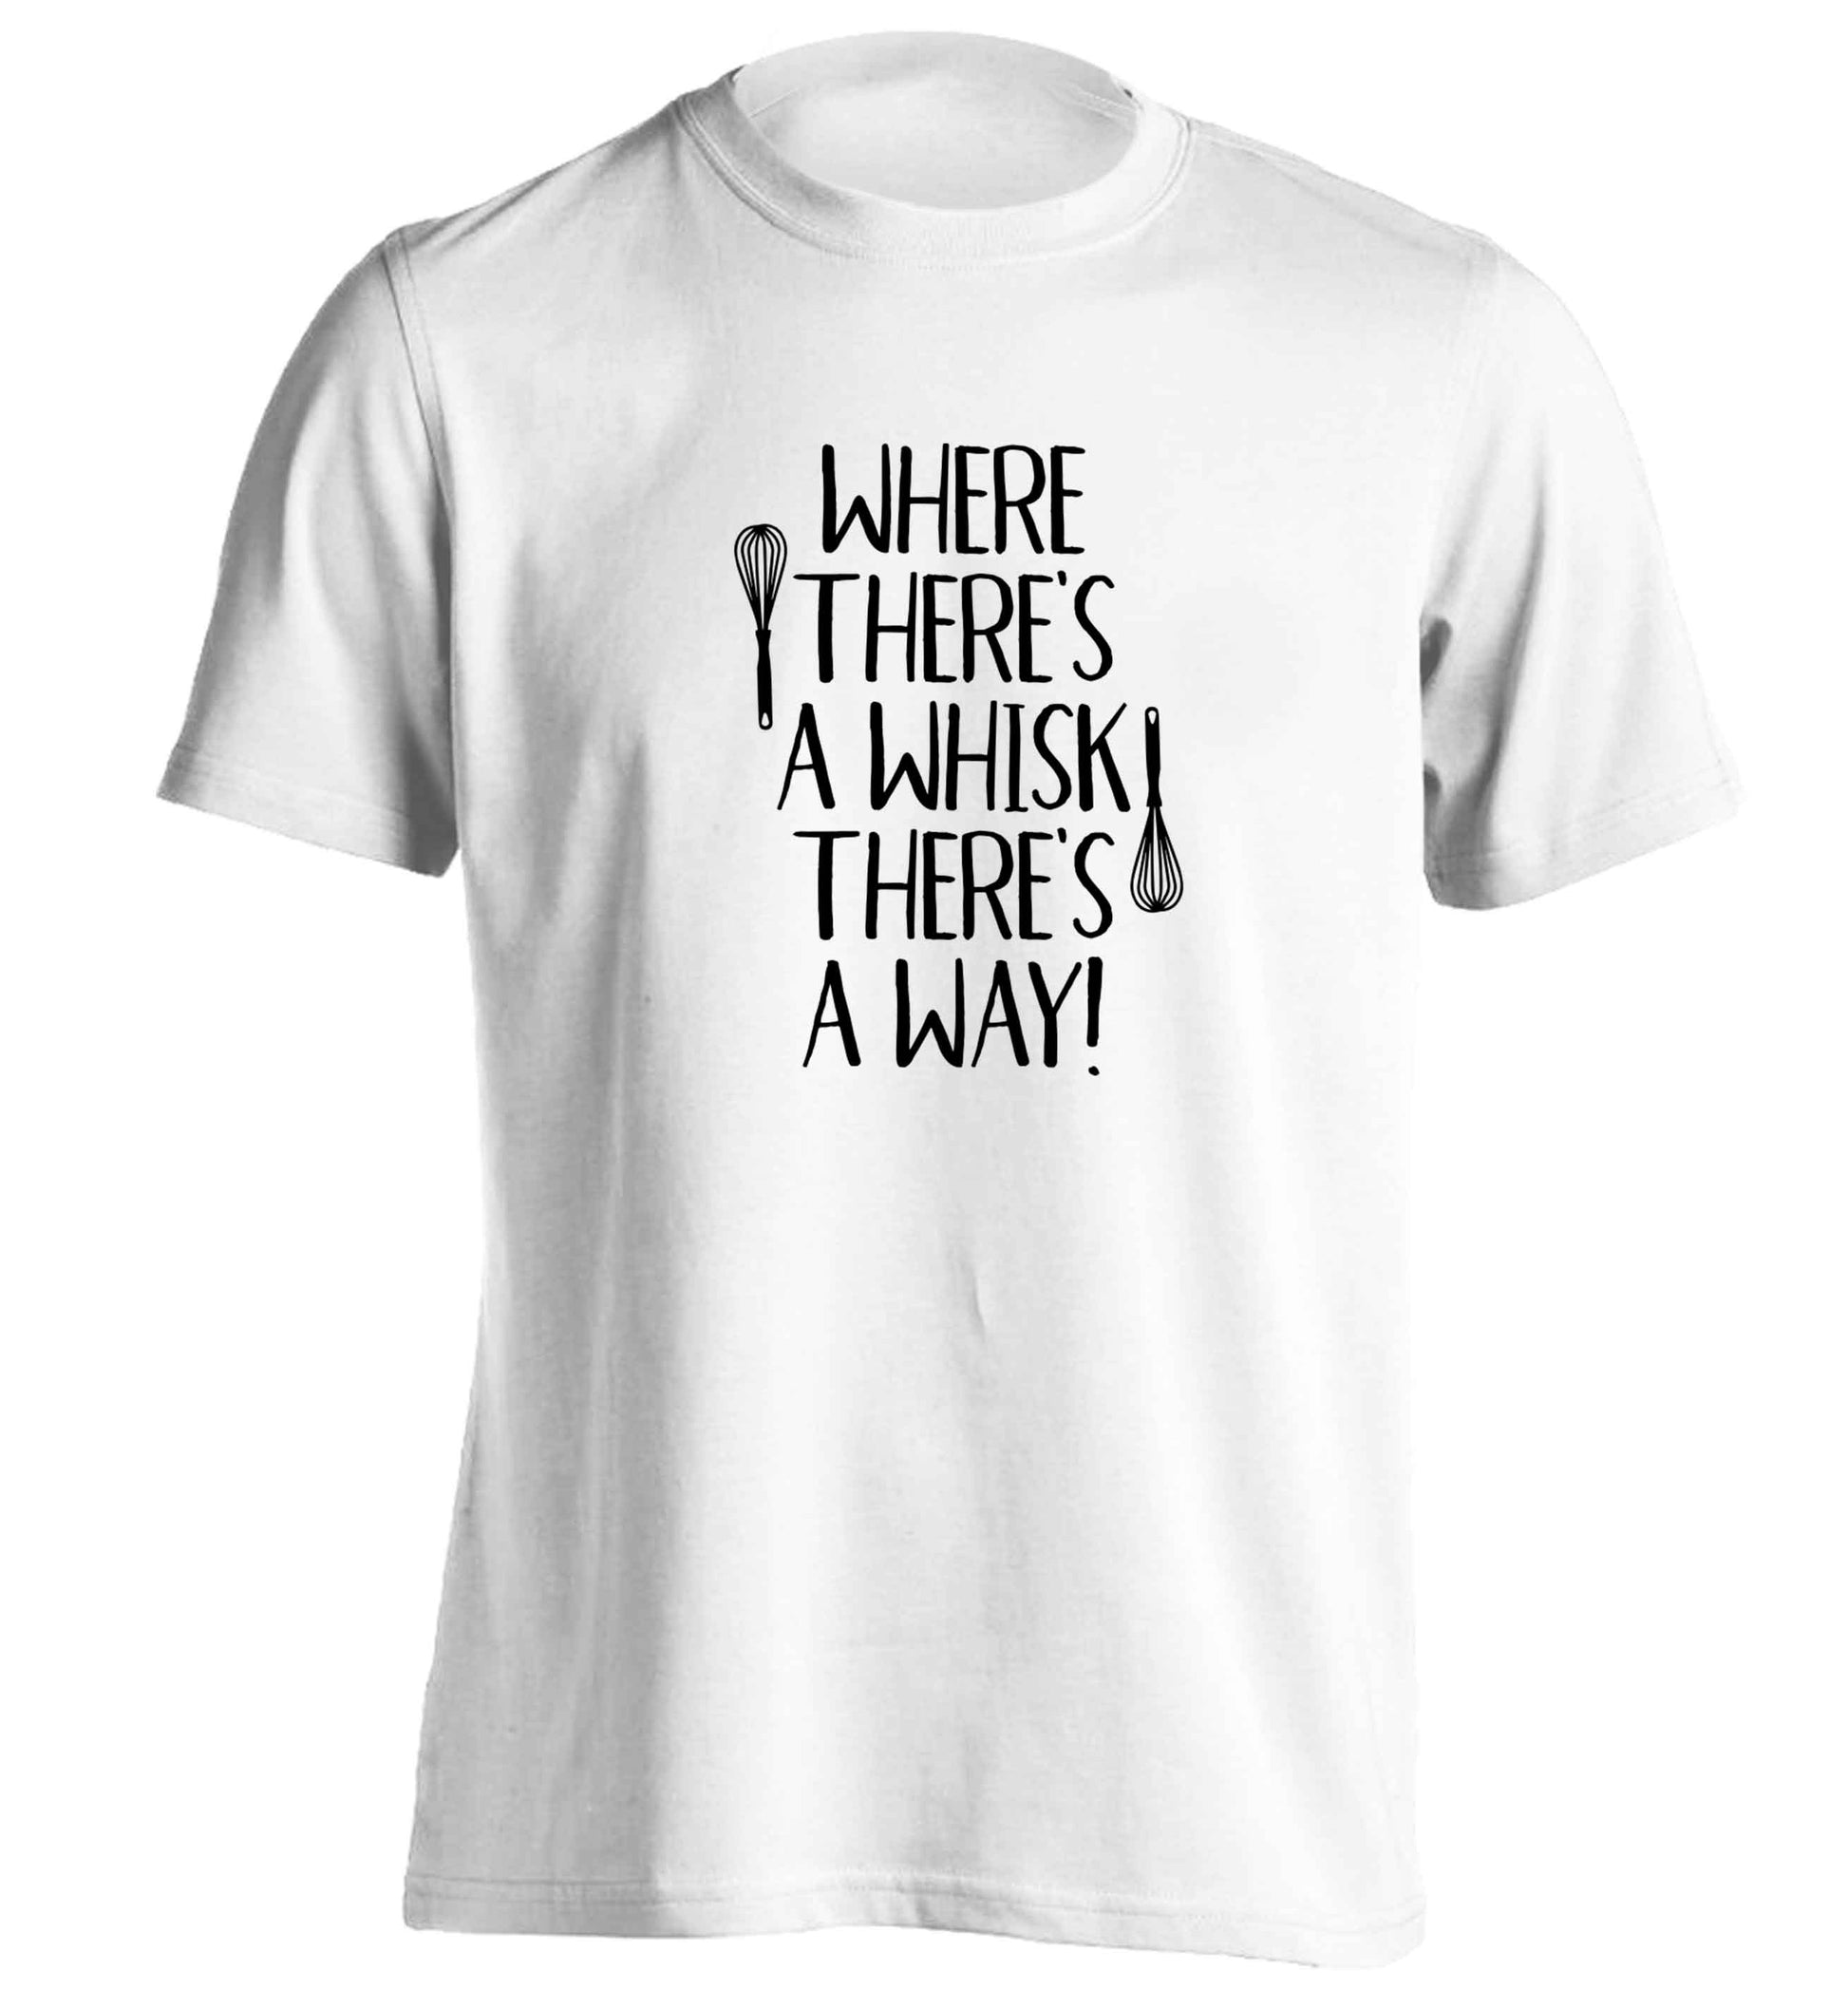 Where there's a whisk there's a way adults unisex white Tshirt 2XL